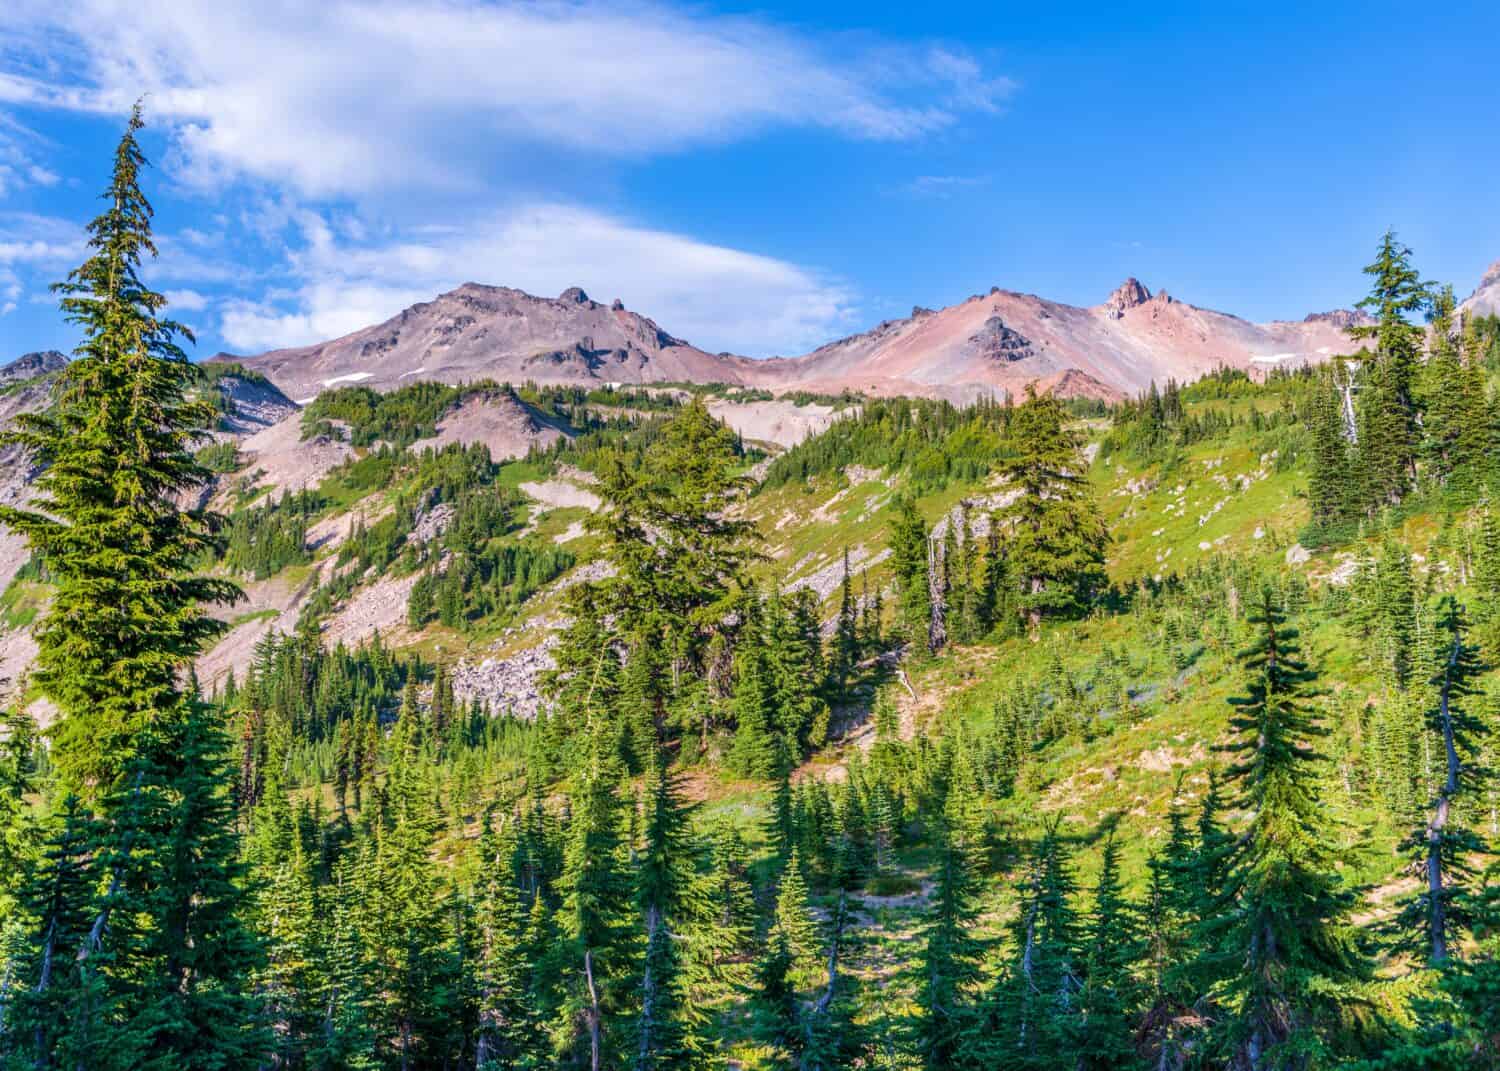 Old volcanic terrain rises above an alpline meadow at Goat Rocks Wilderness Area in Washington State.